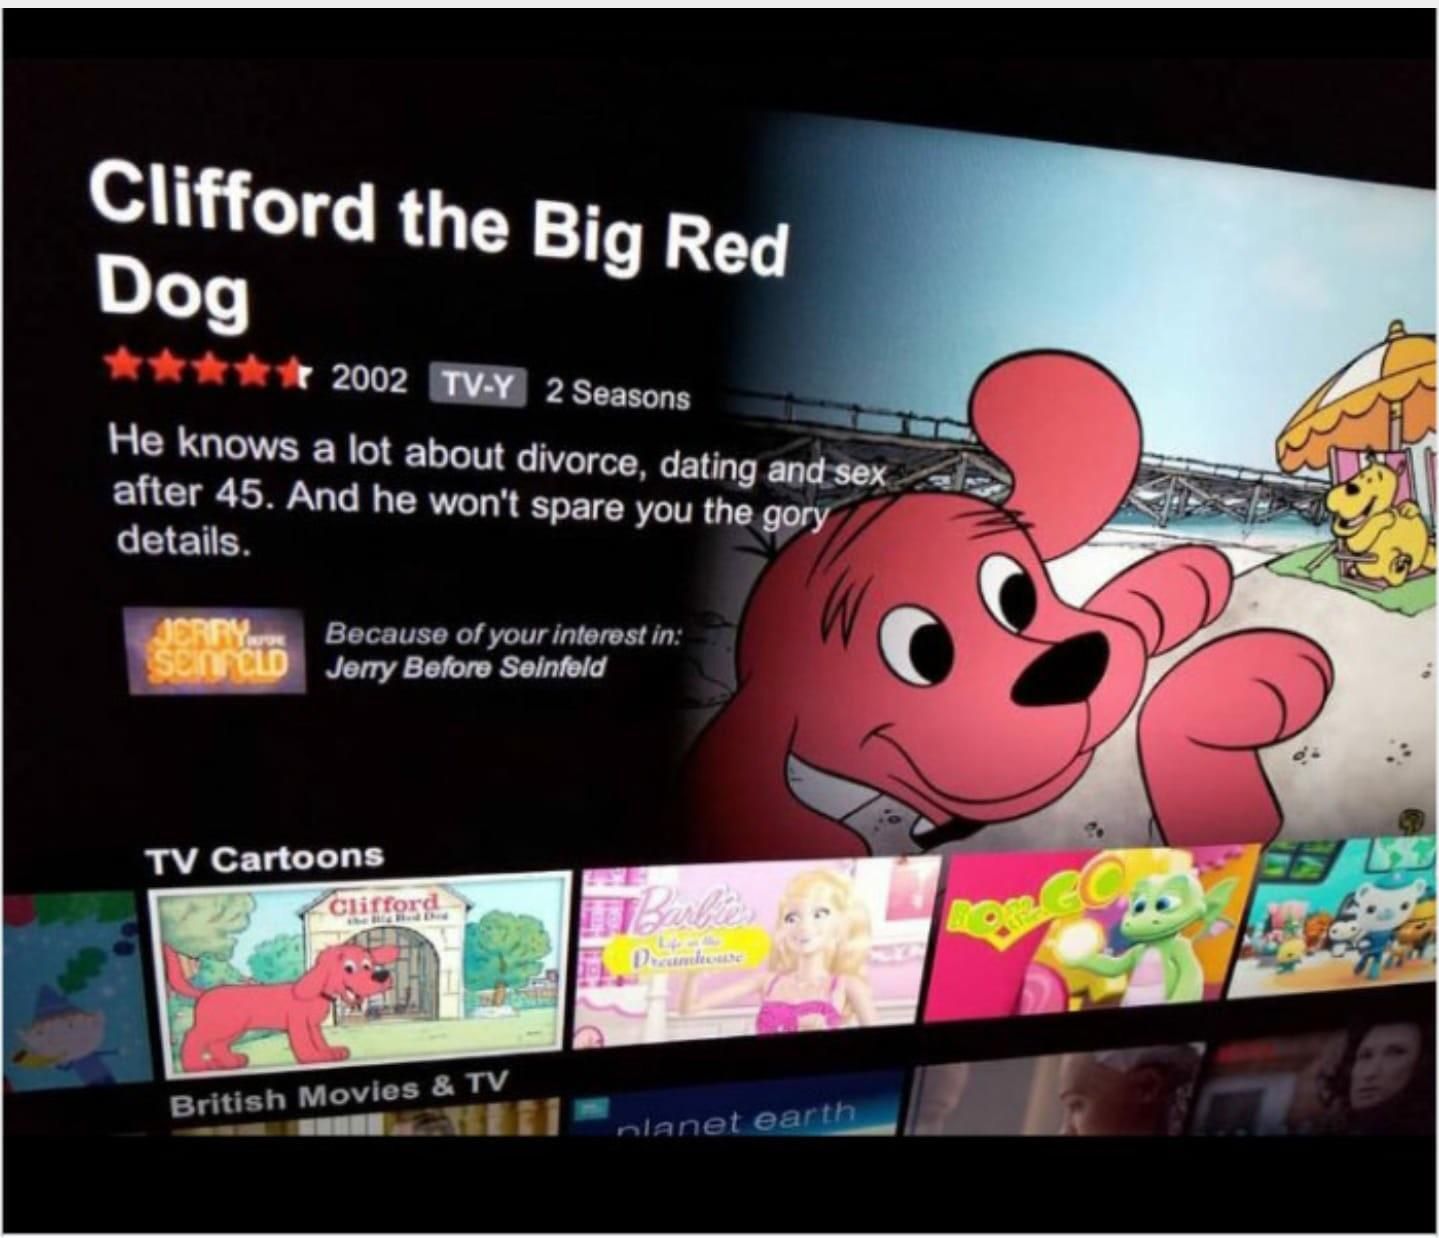 Clifford has changed